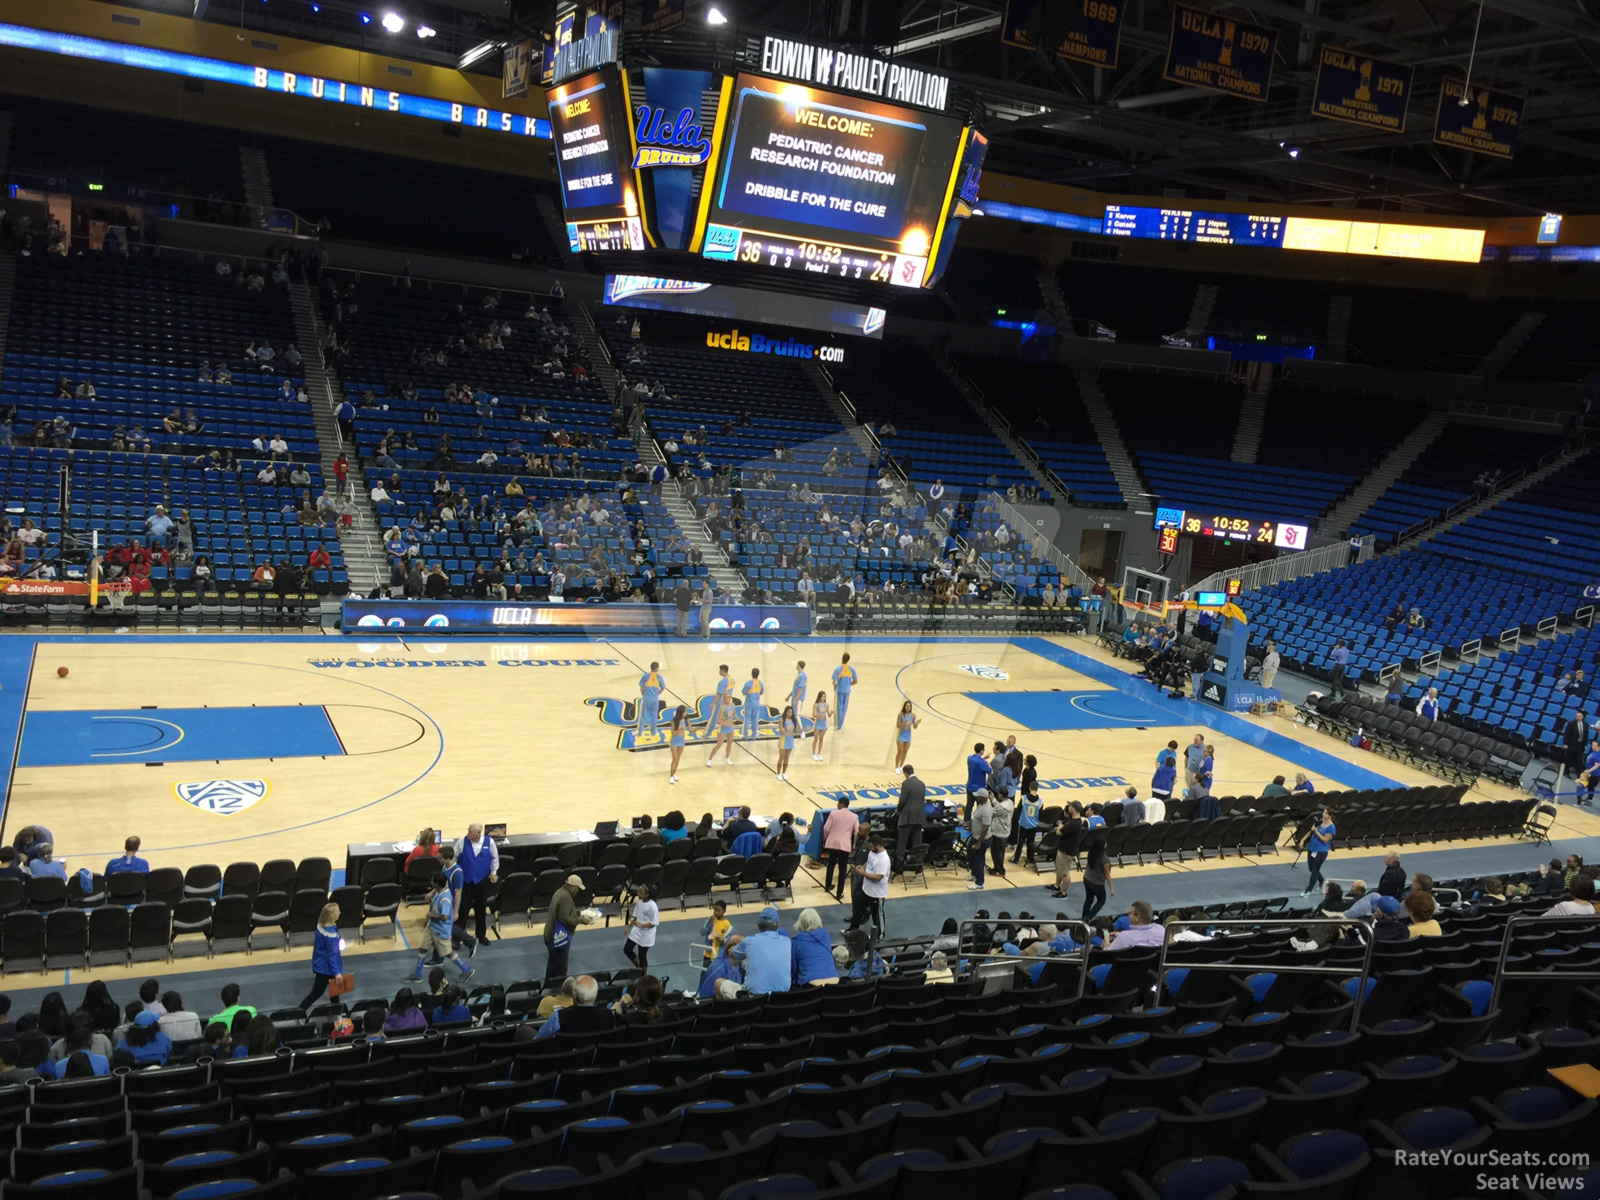 section 116, row 13 seat view  - pauley pavilion